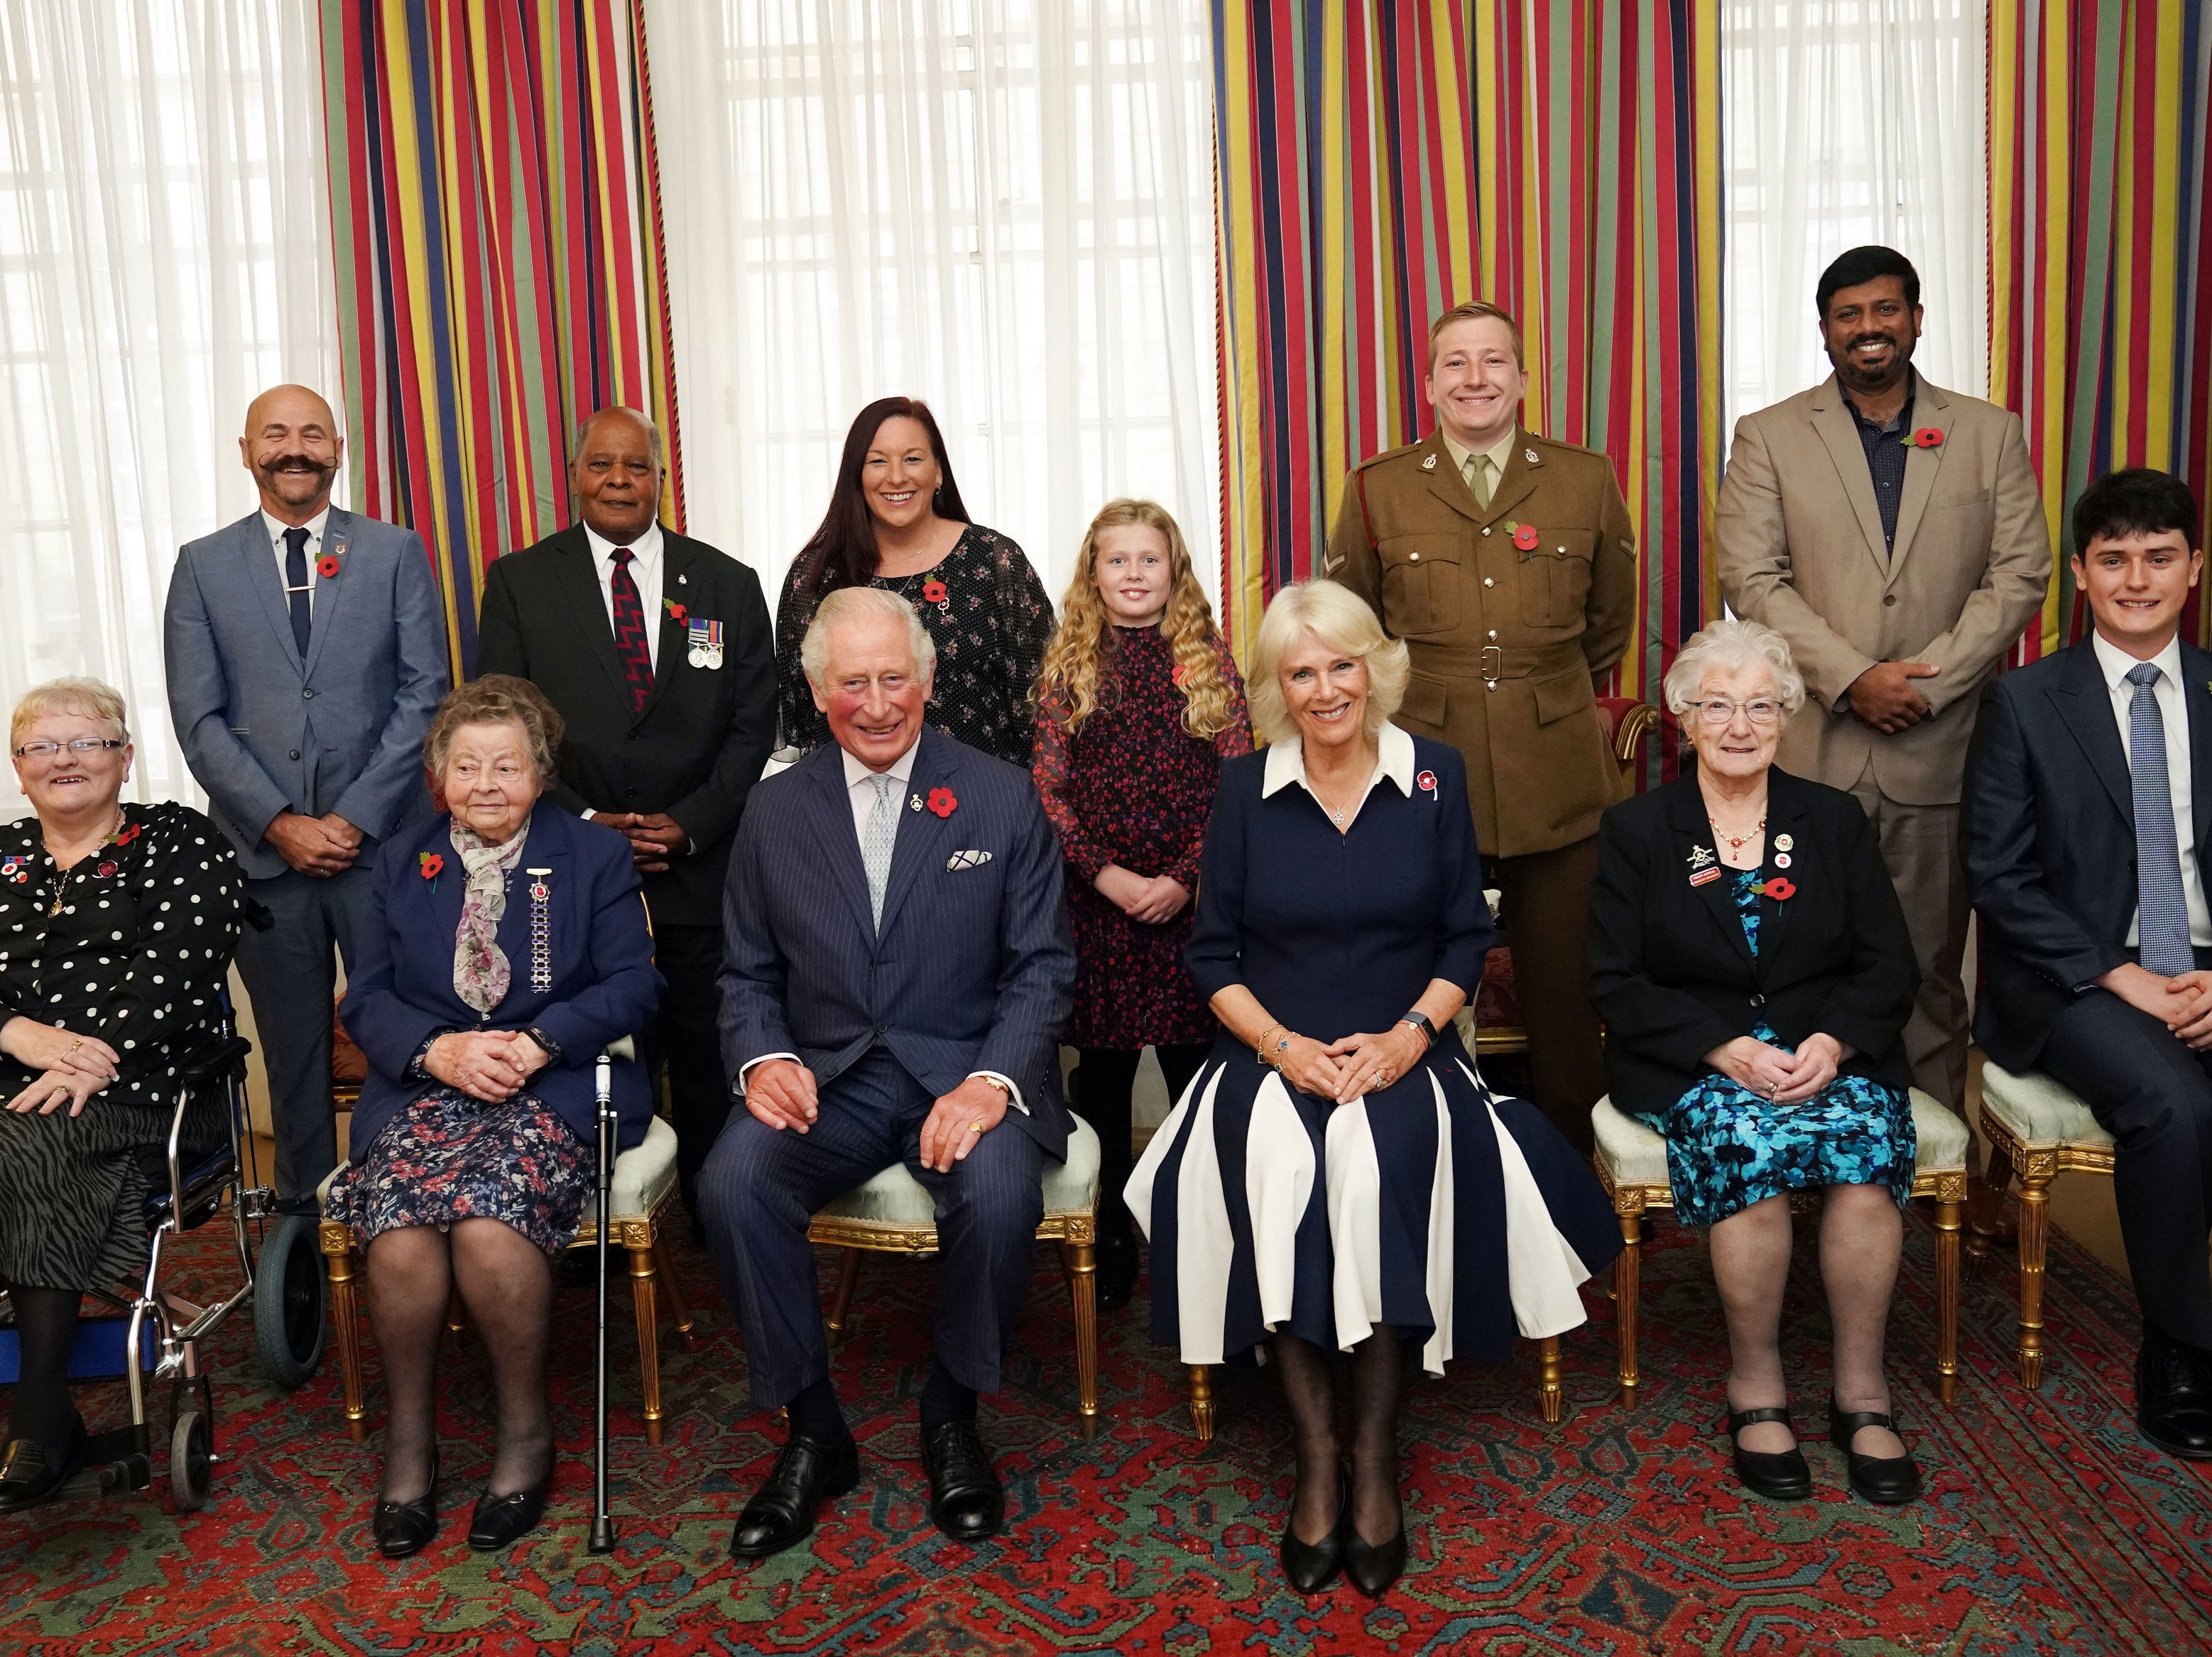 The Prince of Wales (front centre) and Duchess of Cornwall (third right front), with ten Royal British Legion (RBL) Poppy Appeal collectors: (front row left-right) Lesleyanne Gardner, Jill Gladwell, Vera Parnaby, Billy Wilde, and (back row left-right) David Kelsey, Andy Owens, Anne-Marie Cobley, Maisie Mead, Lance Corporal Ashley Martin and Mirza Shahzad at Clarence House, London, during the official launch of the centenary poppy appeal